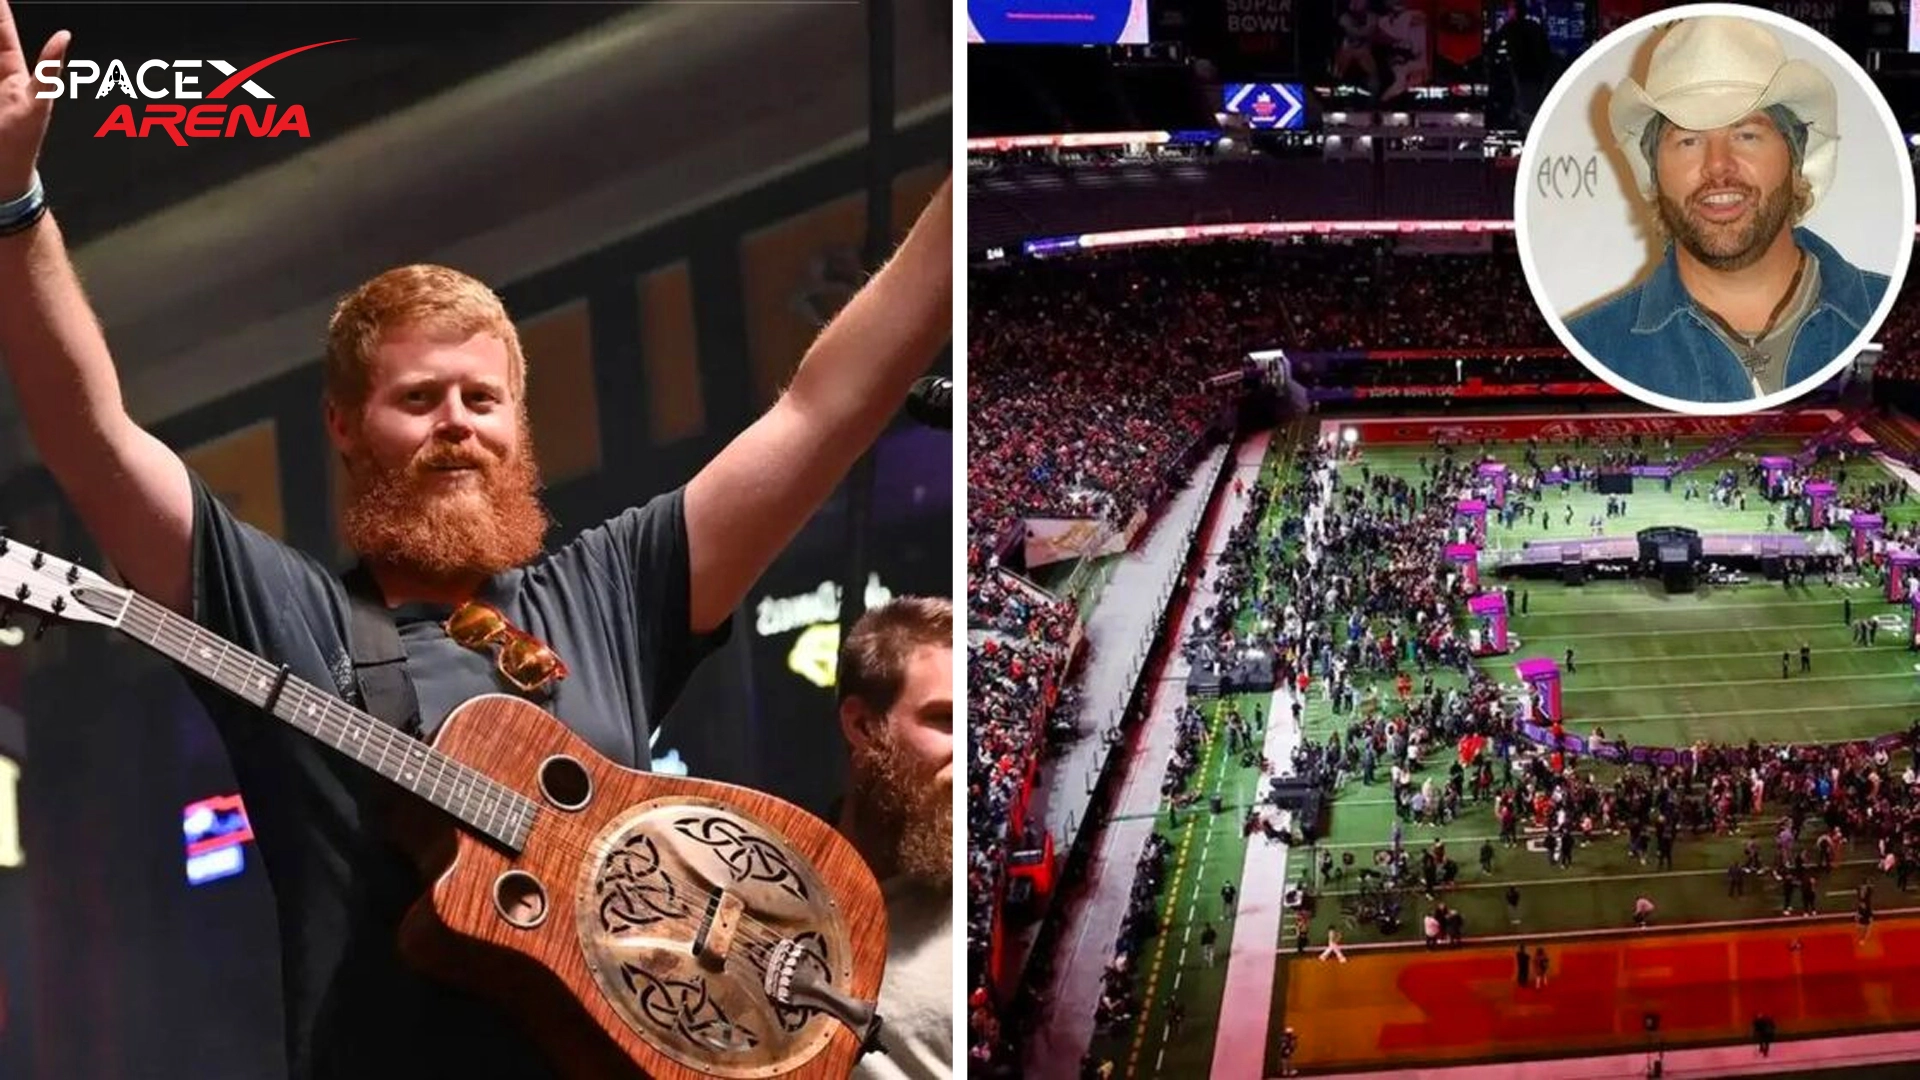 With-over-100-million-views_-Oliver-Anthonys-Toby-Keith-tribute-is-now-the-most-watched-Super-Bowl